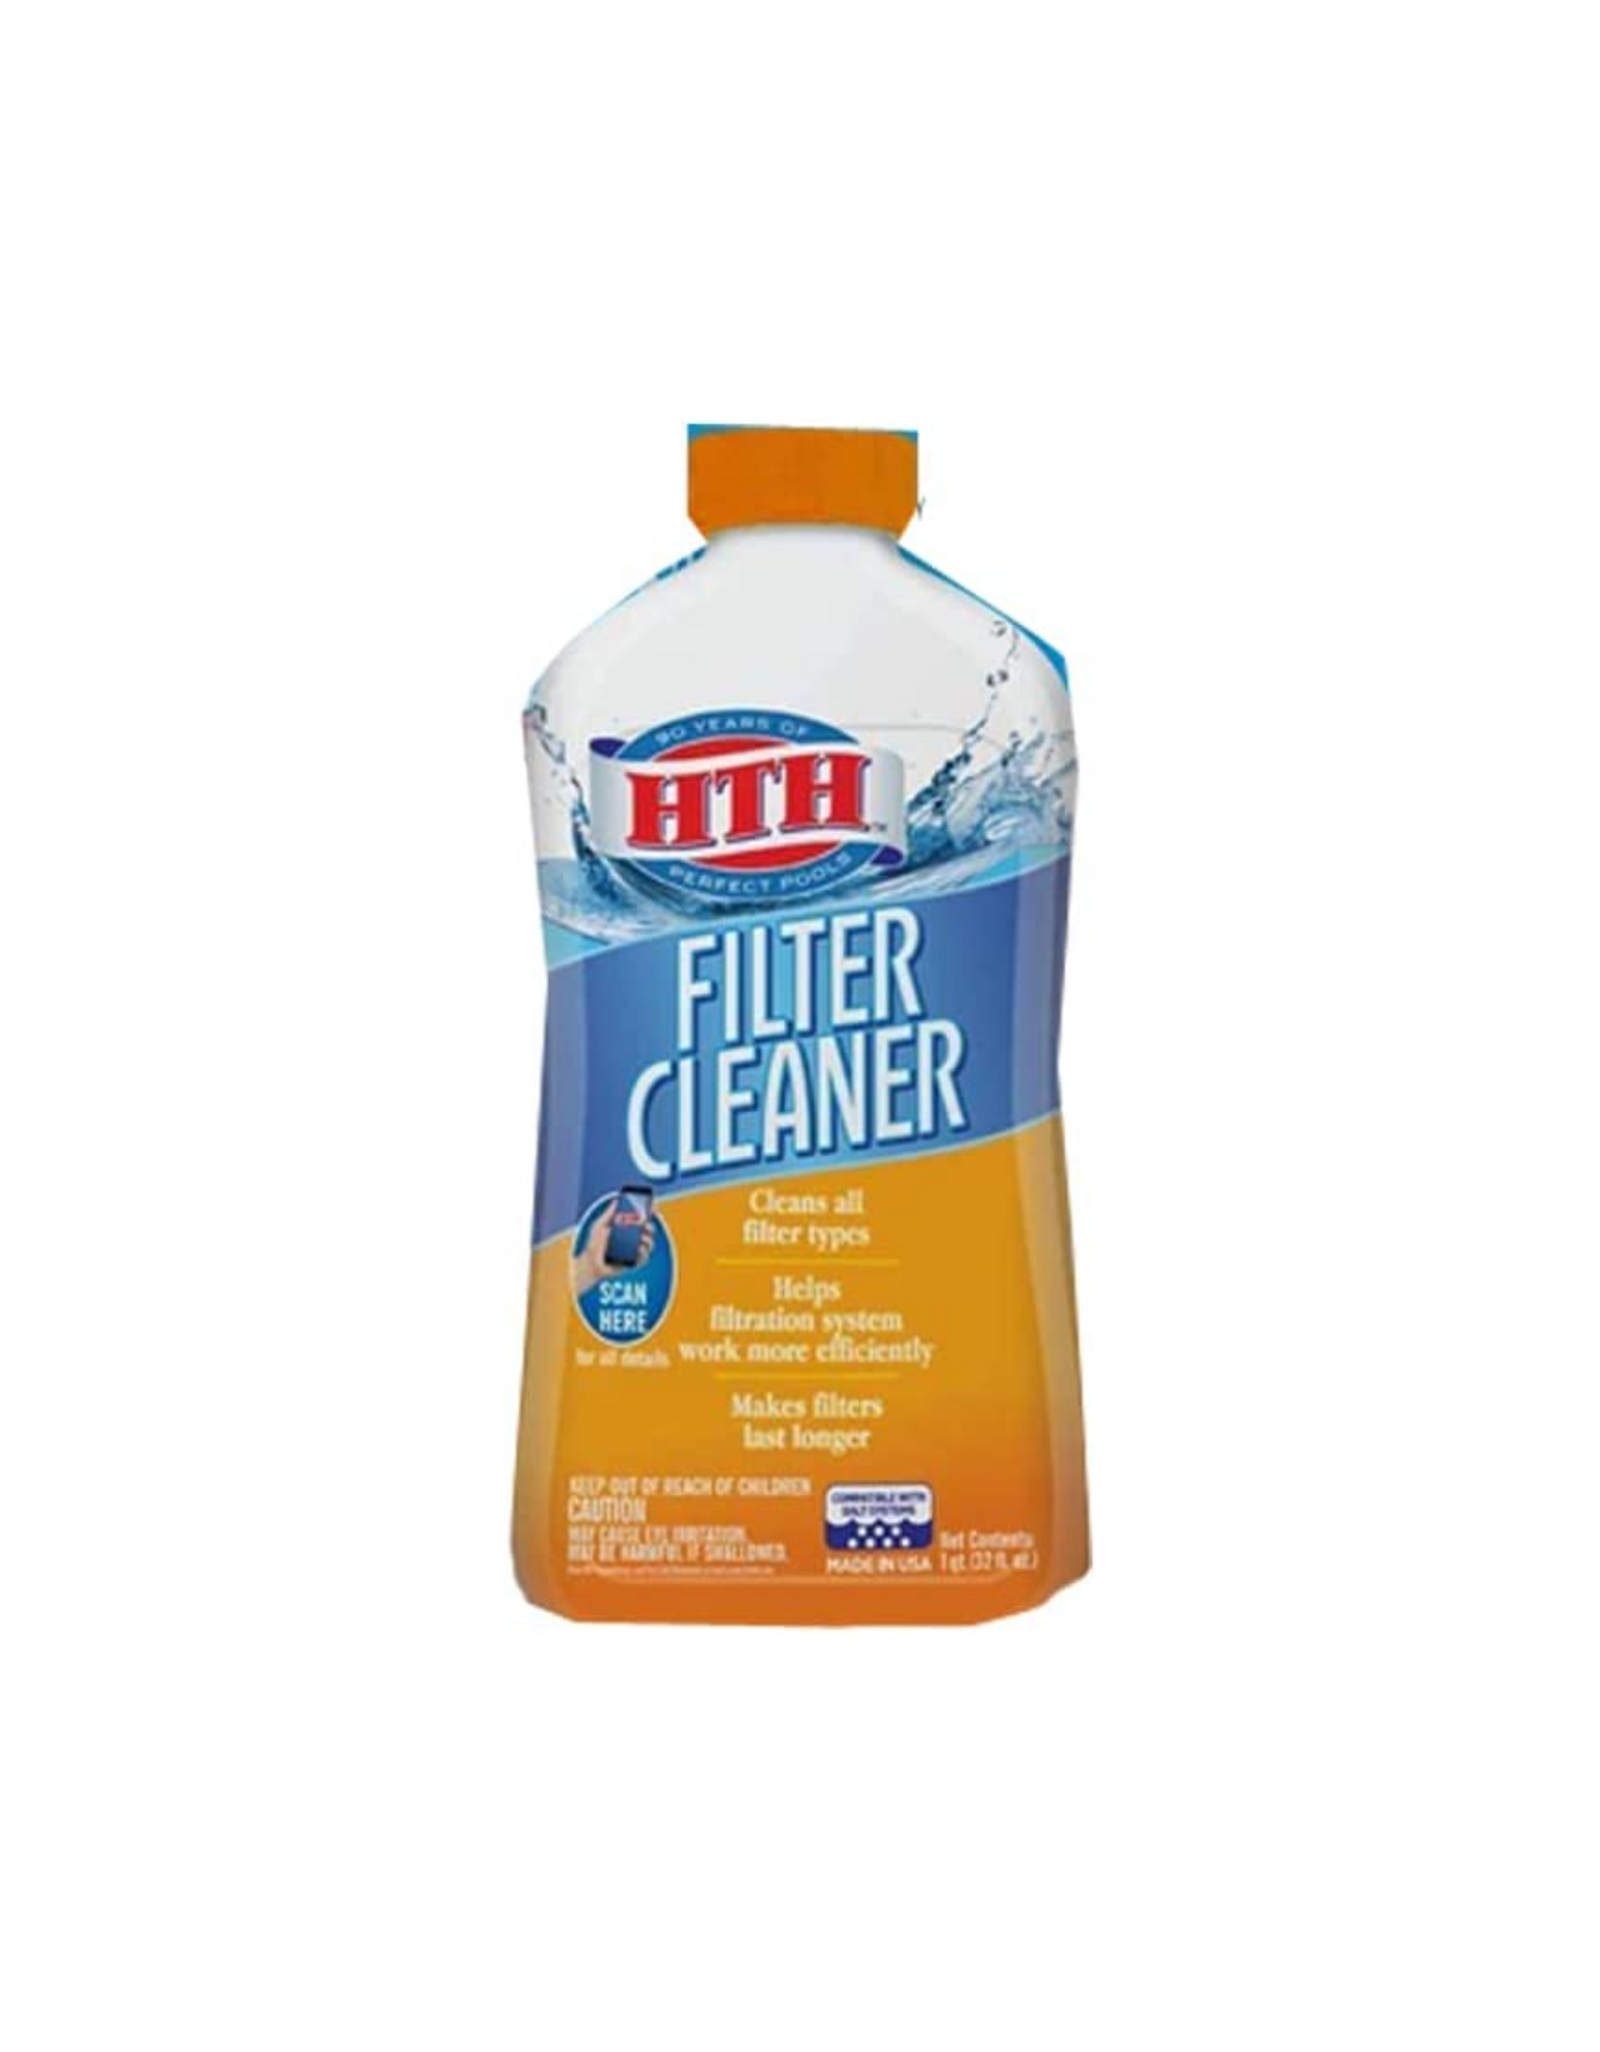 HTH 67025 Filter Cleaner Care, Cleans All Filter Types, 1 Quart